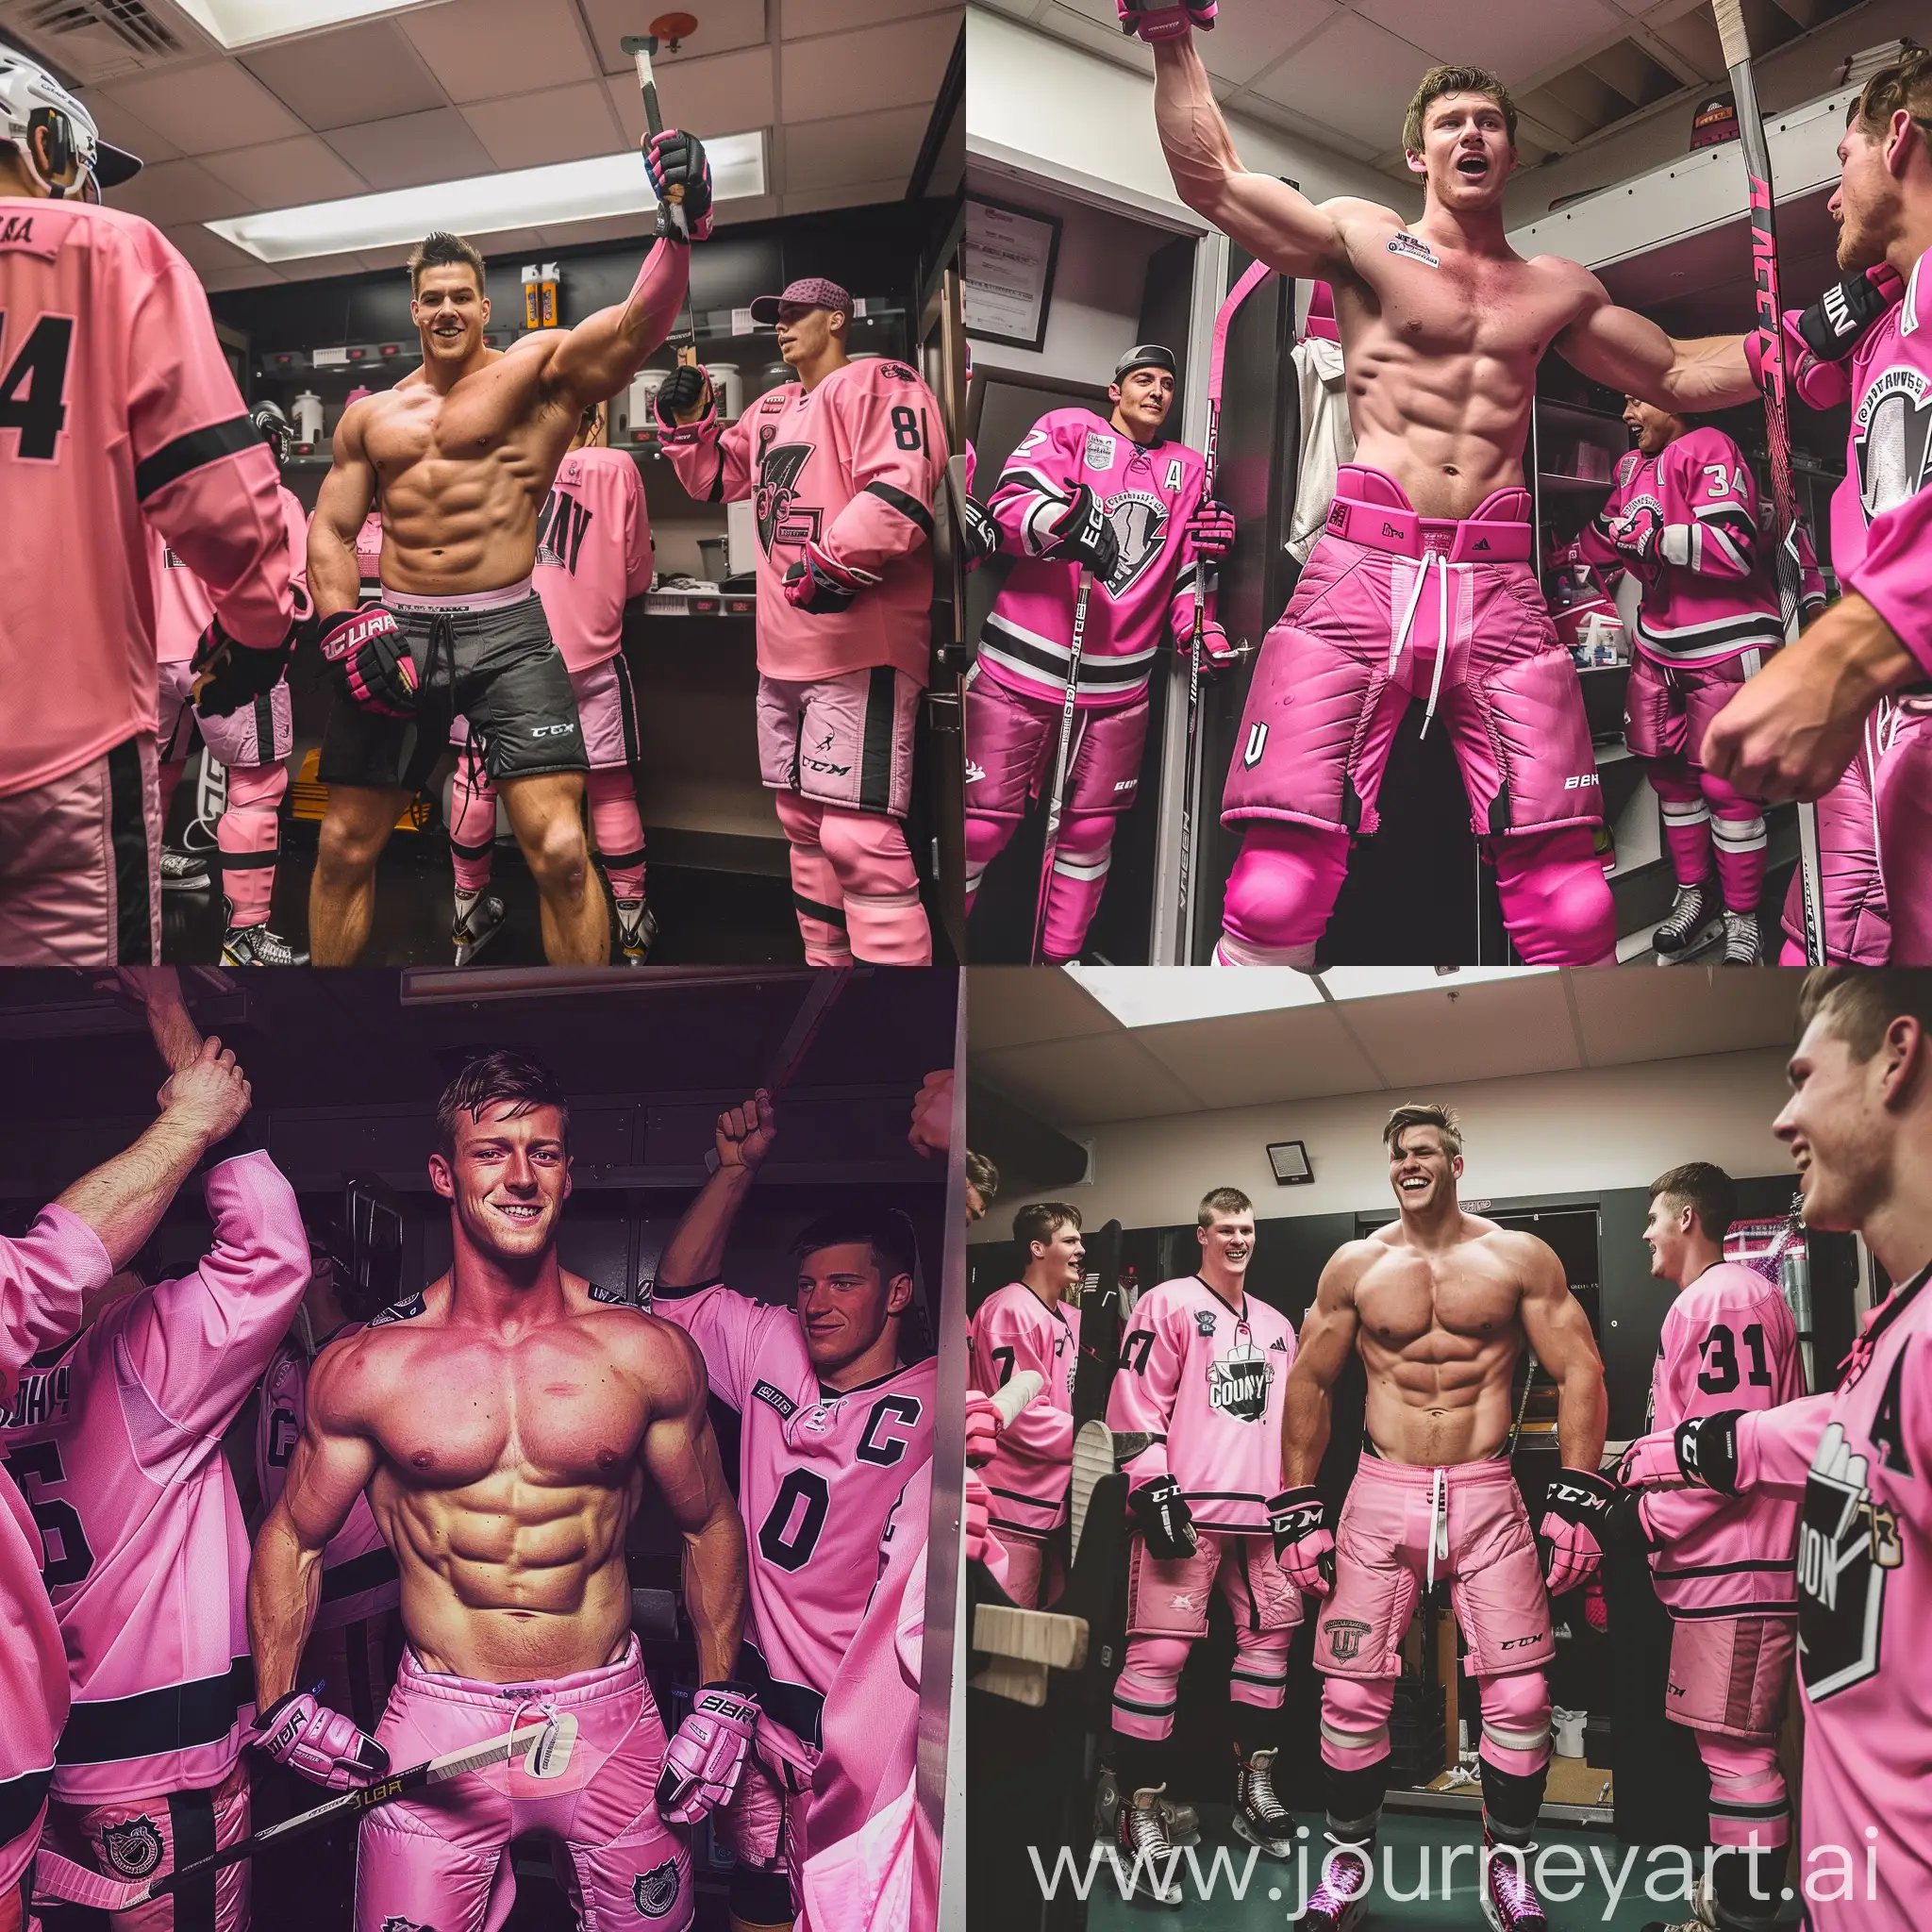 muscular college hockey player in the lockerroom. He is super ripped. His teammates are around him and are equally as ripped. Picture is in color, most of their uniform is pink. They are celebrating a tournament win.
They play for "goony u". 
